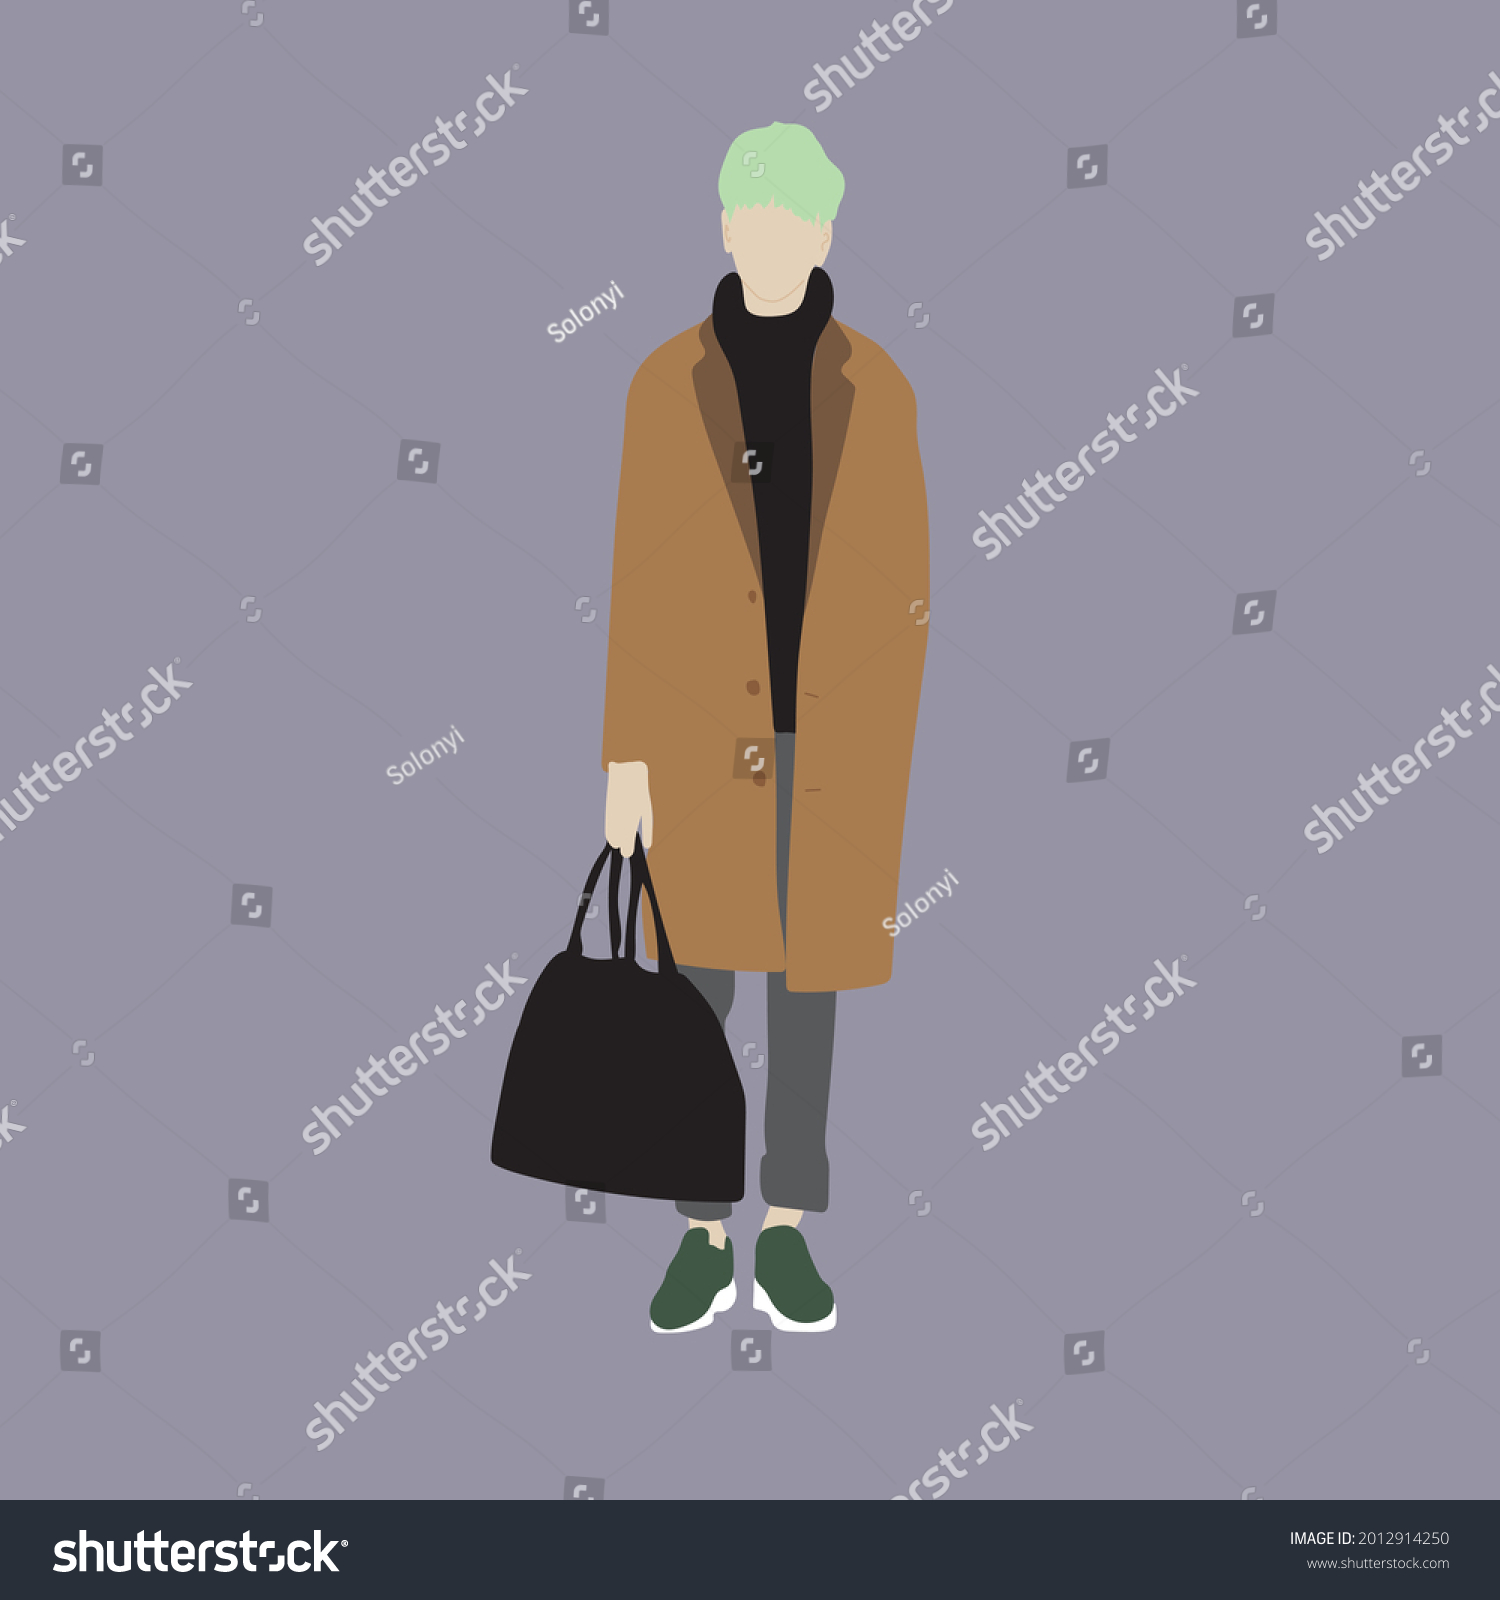 SVG of Vector illustration of Kpop street fashion. Street idols of Koreans. The idol of Kpop men's fashion. A guy in a brown coat and gray trousers with sneakers. svg